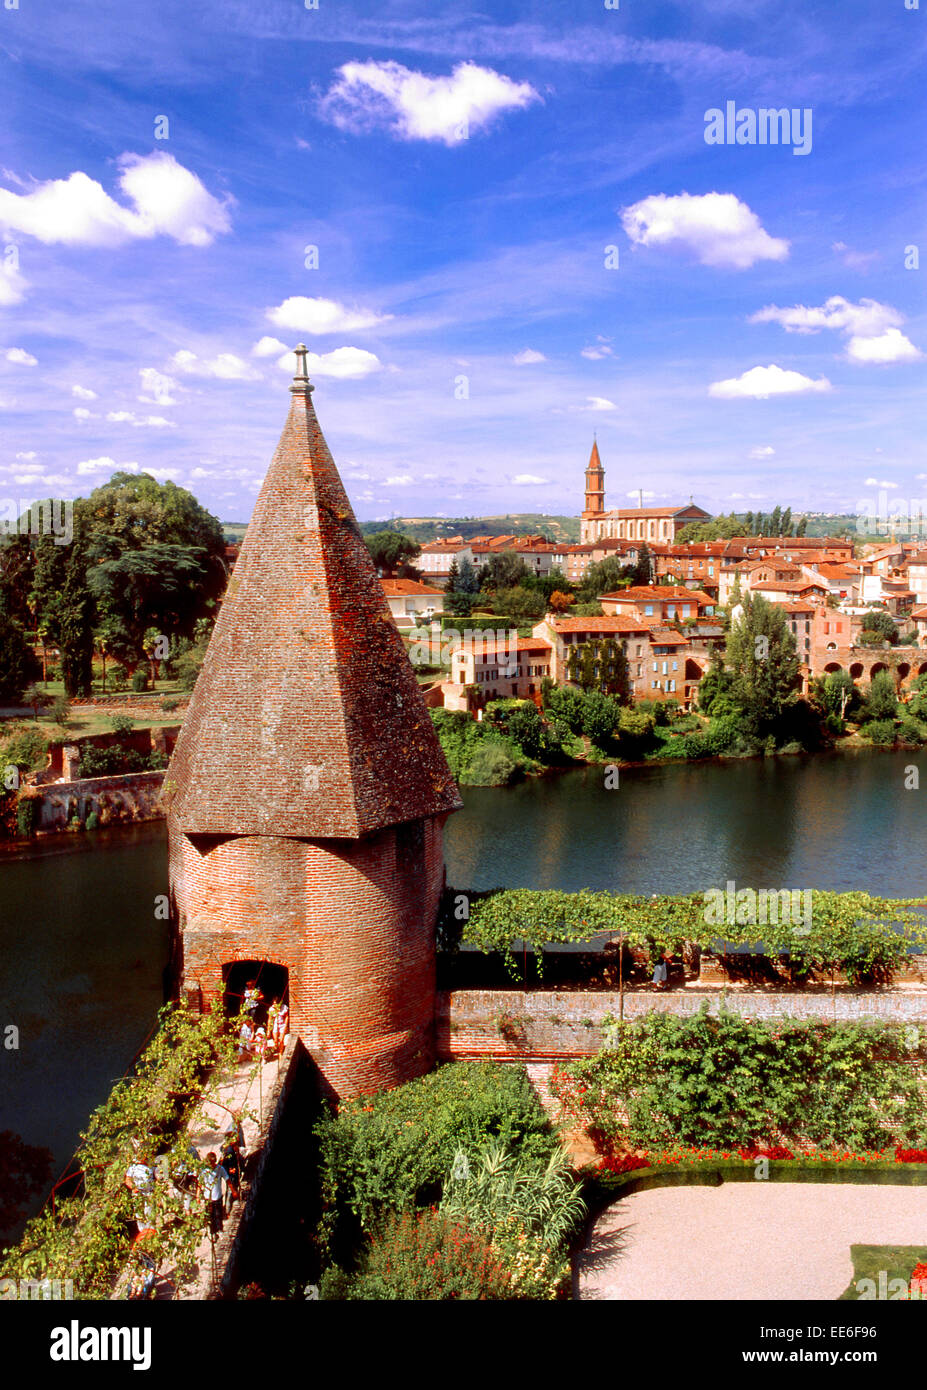 Albi, Midi-Pyrenees, France. View over River Tarn from Palais de la Berbie, showing formal Gardens of the Bishop's Palace Stock Photo